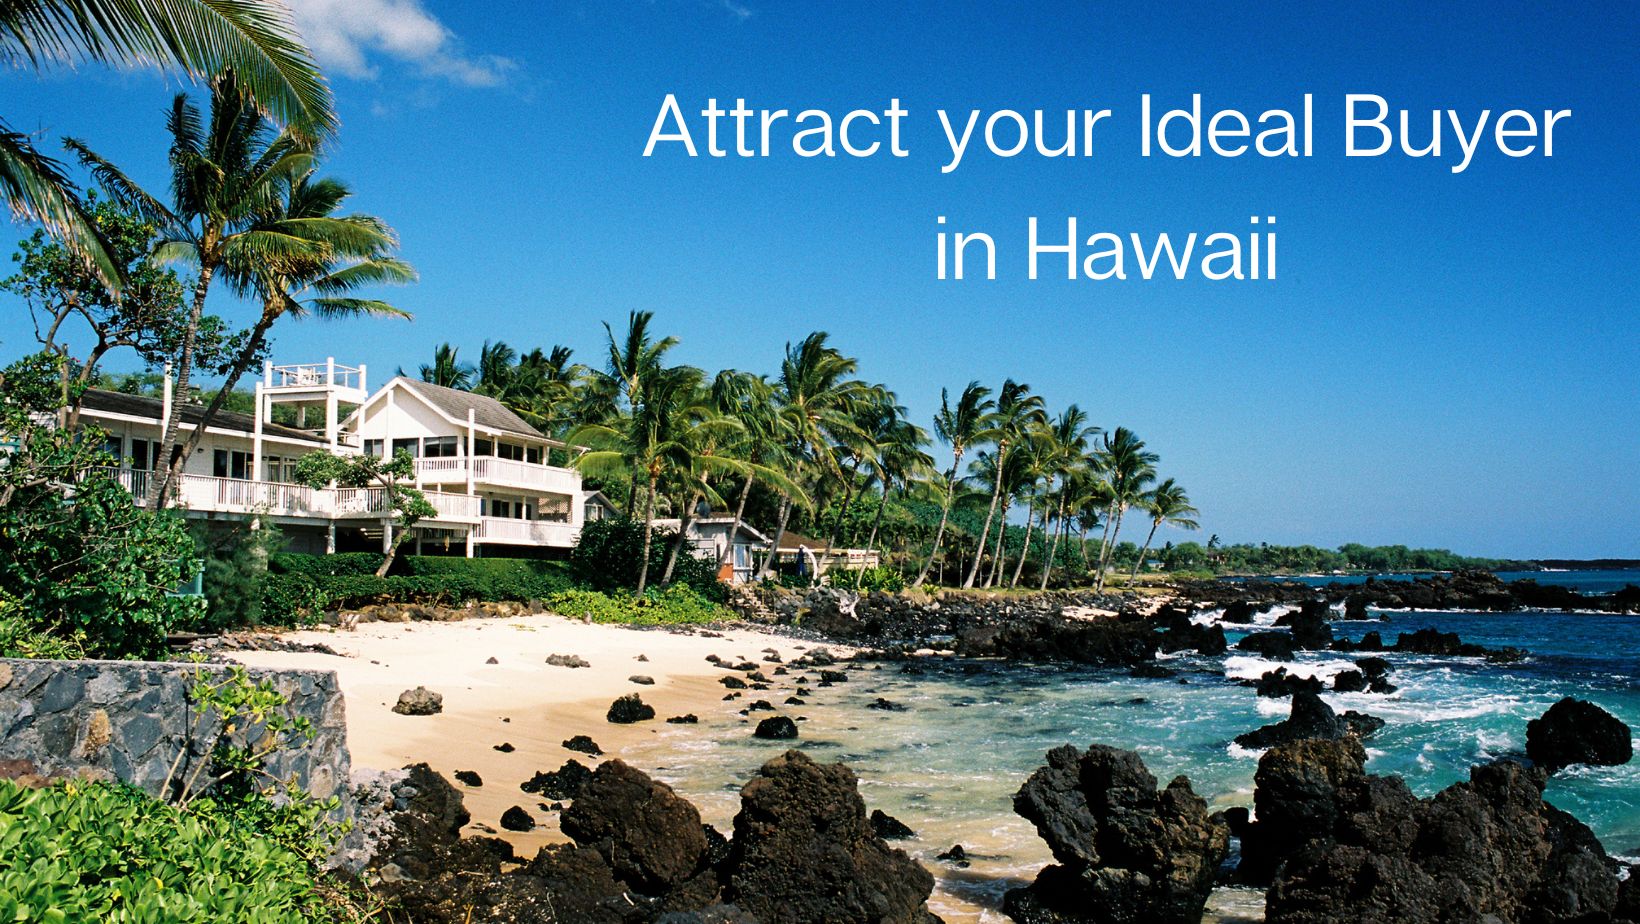 Attract your Ideal Buyer in Hawaii